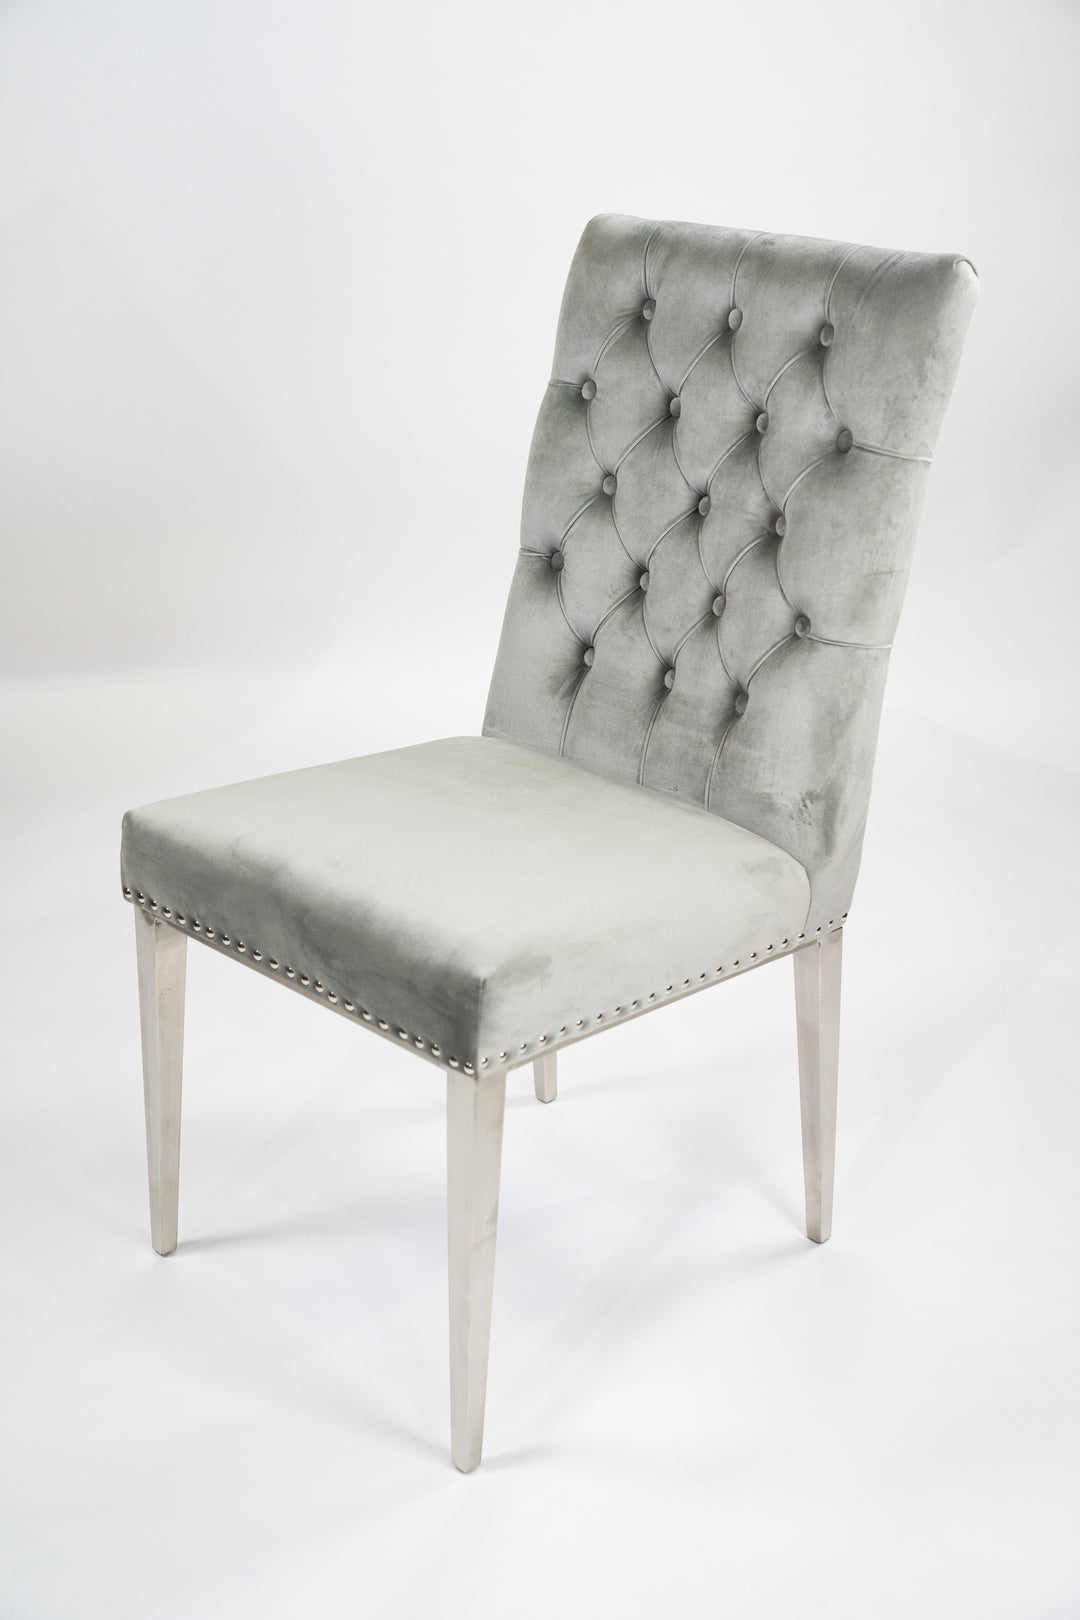 Grey Velvet Button-Tufted Dining Chair With  Metal Legs - Set Of 2 HI-LINE GIFT LTD.